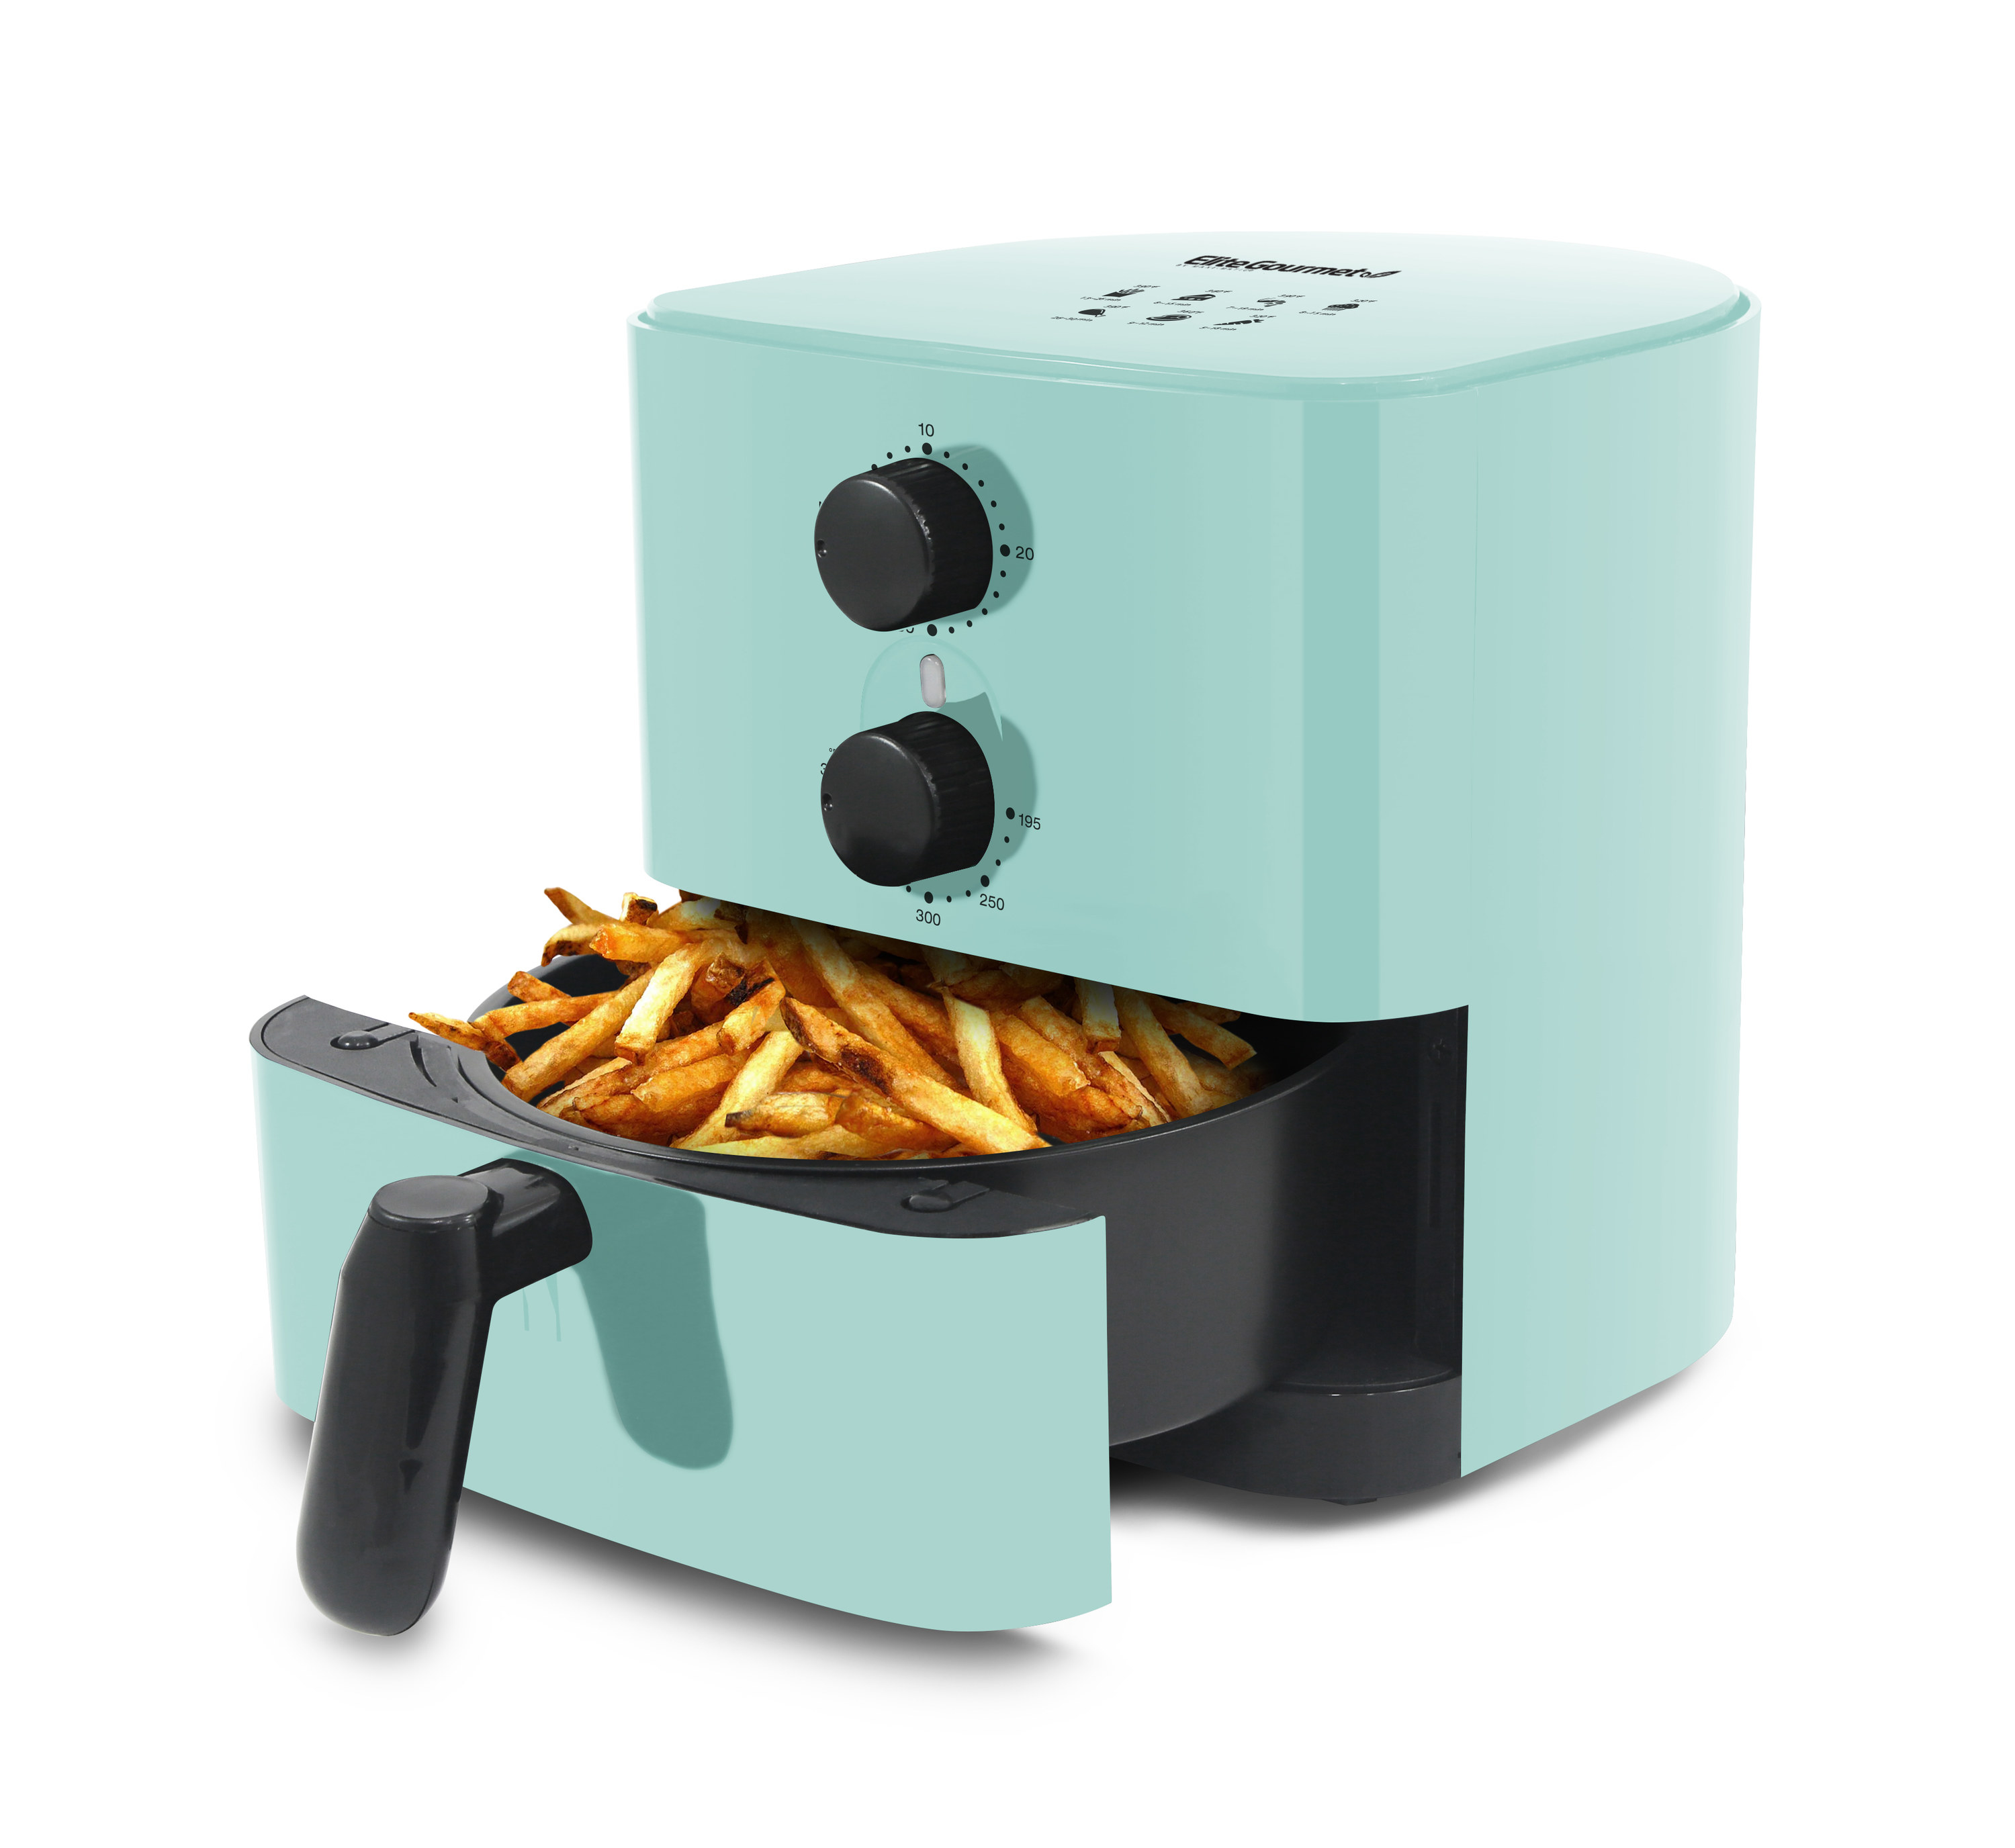 teal Air fryer making french fries